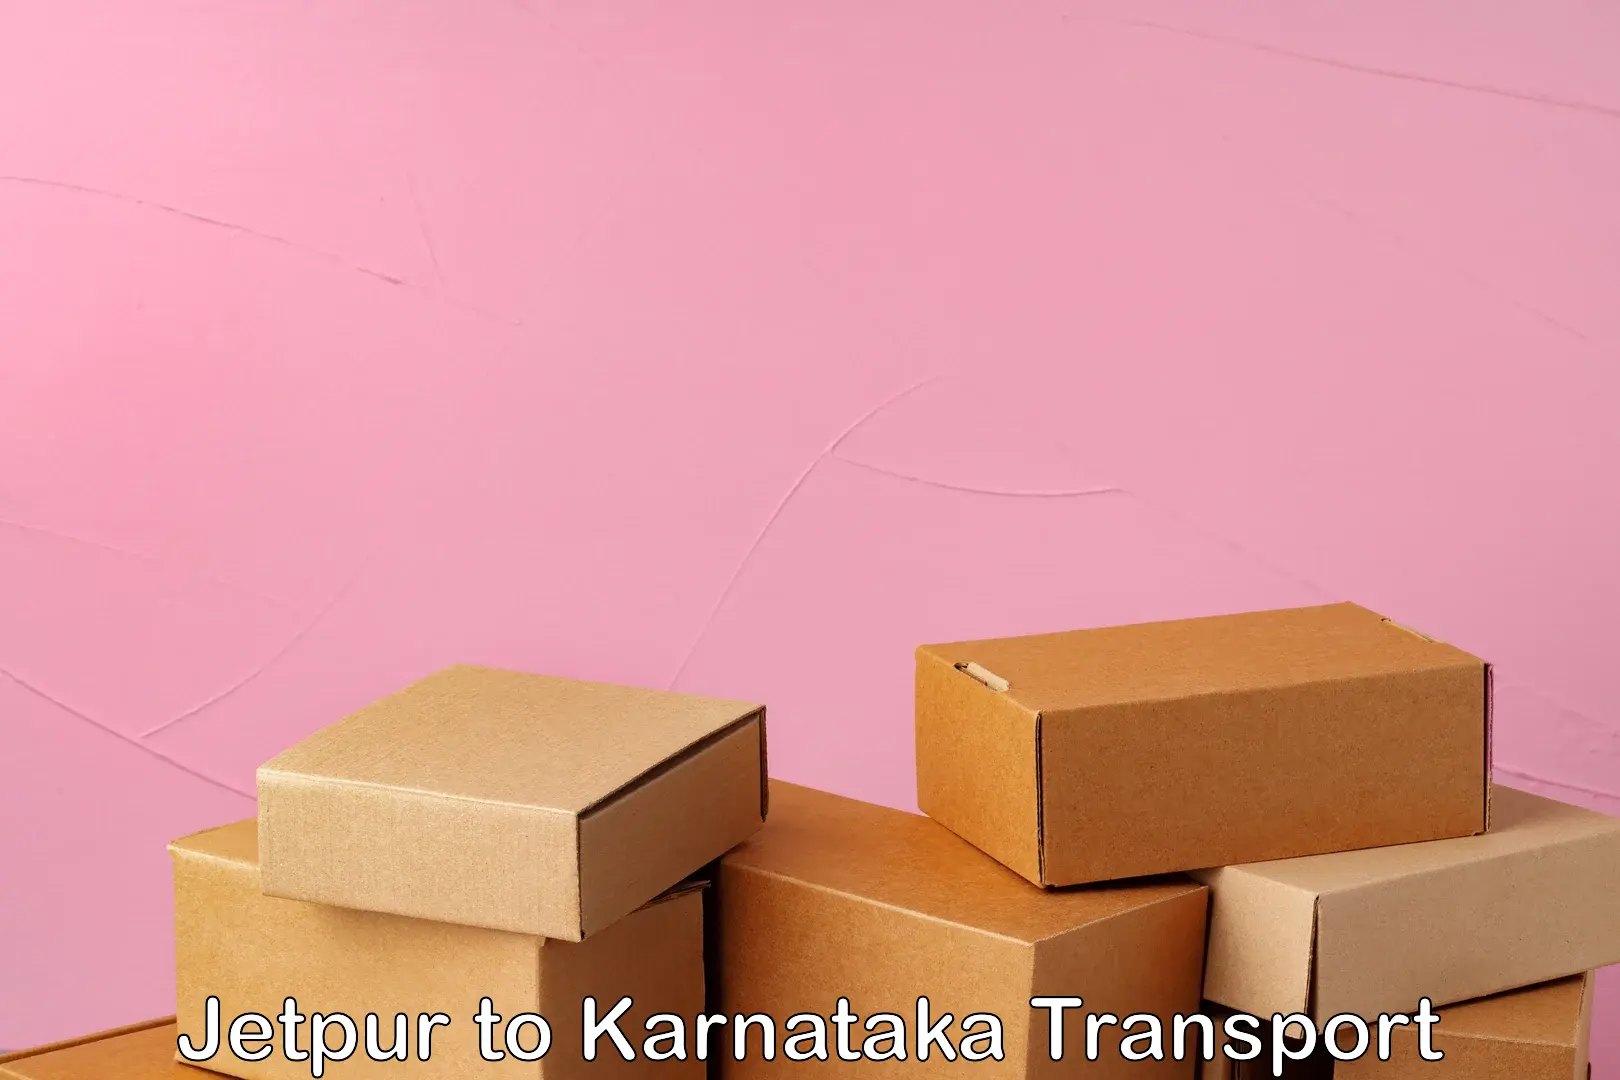 Air freight transport services Jetpur to Mangalore Port